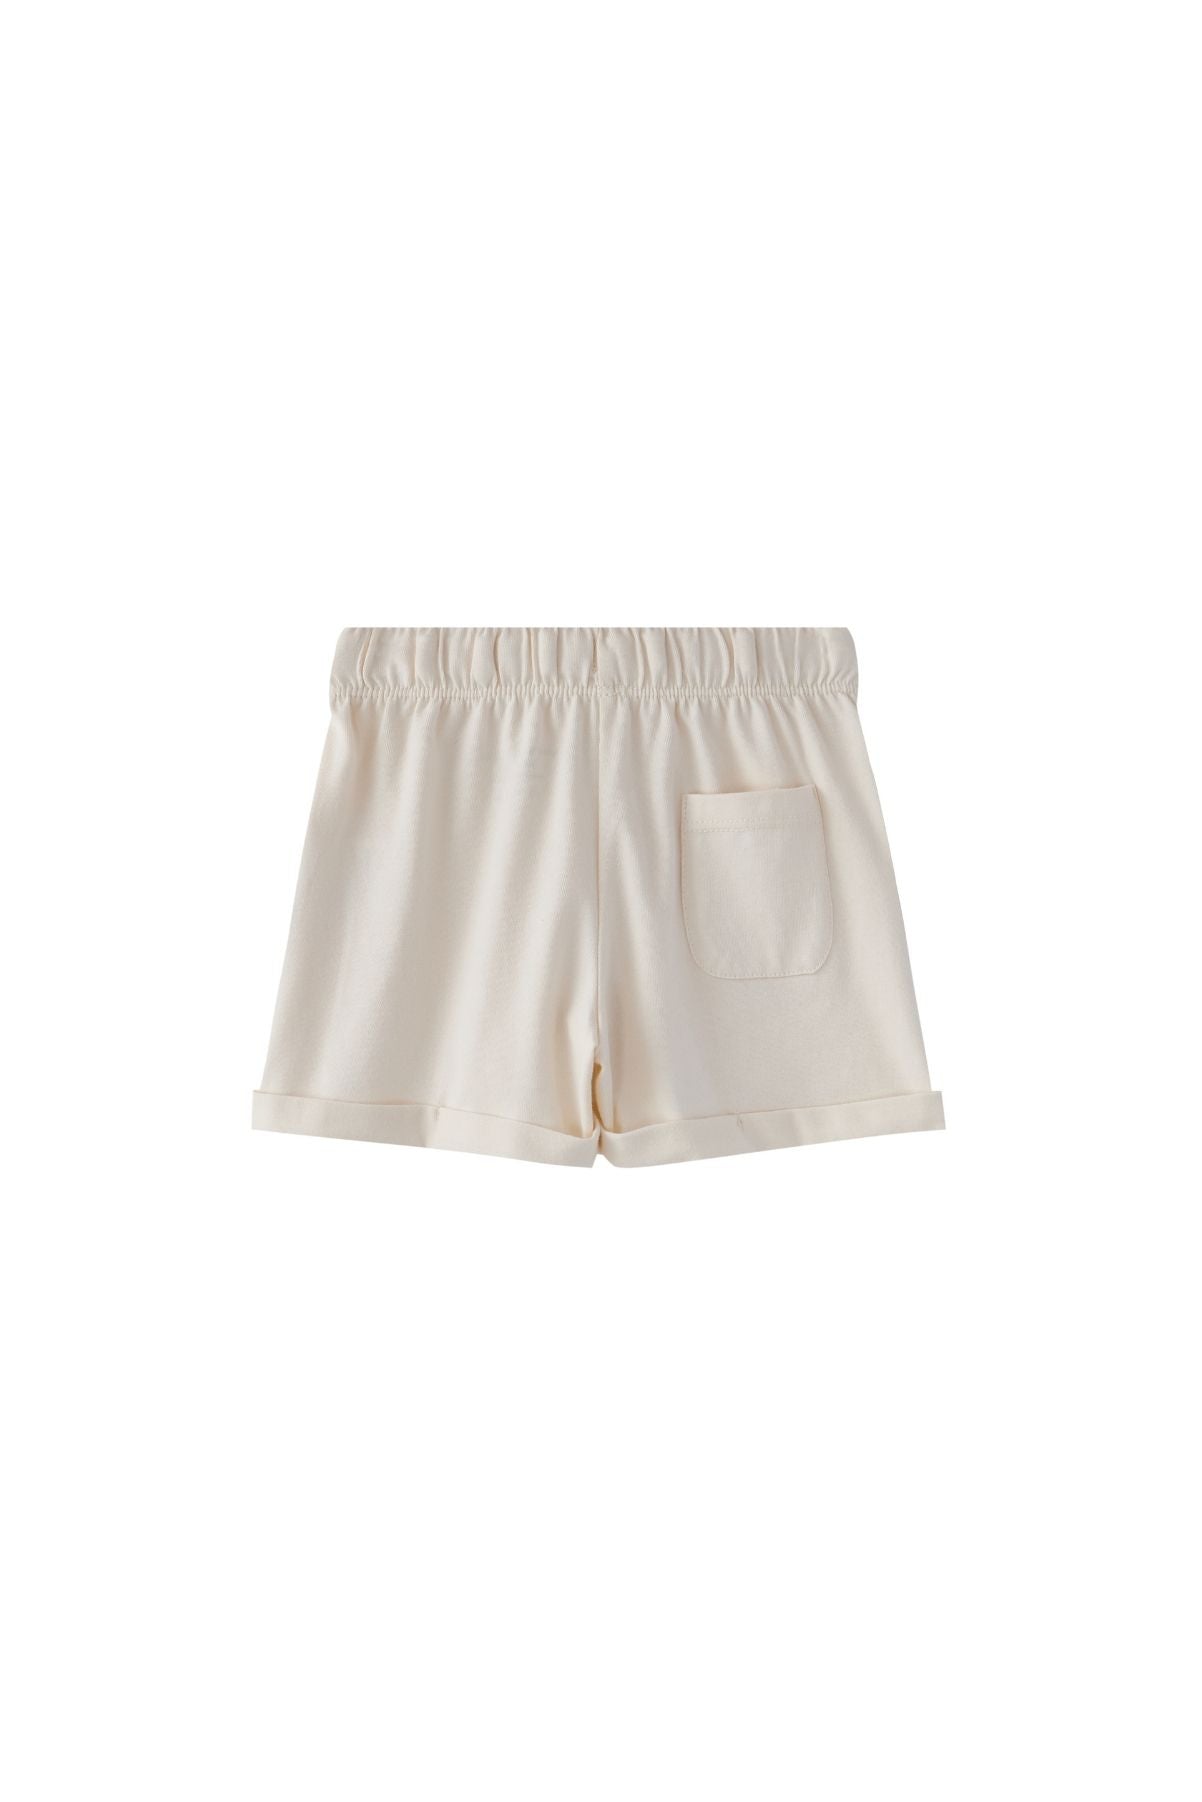 back of Organic Essential Shorts-Antique White